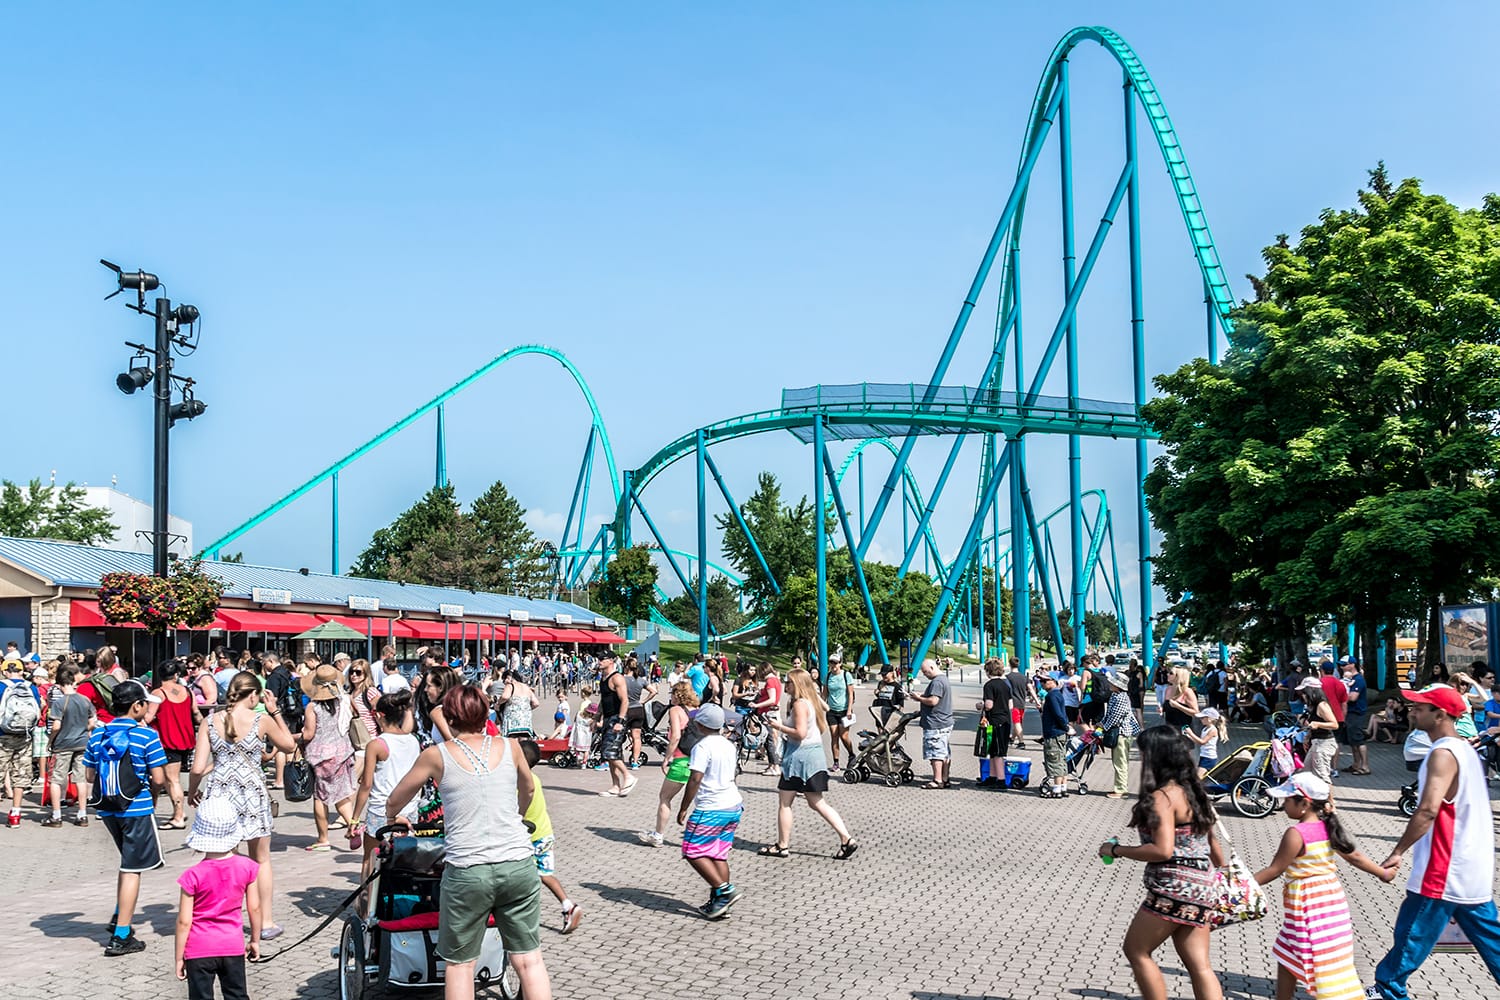 View of Canada's Wonderland. Wonderland is a 130 ha theme park located in Vaughan.